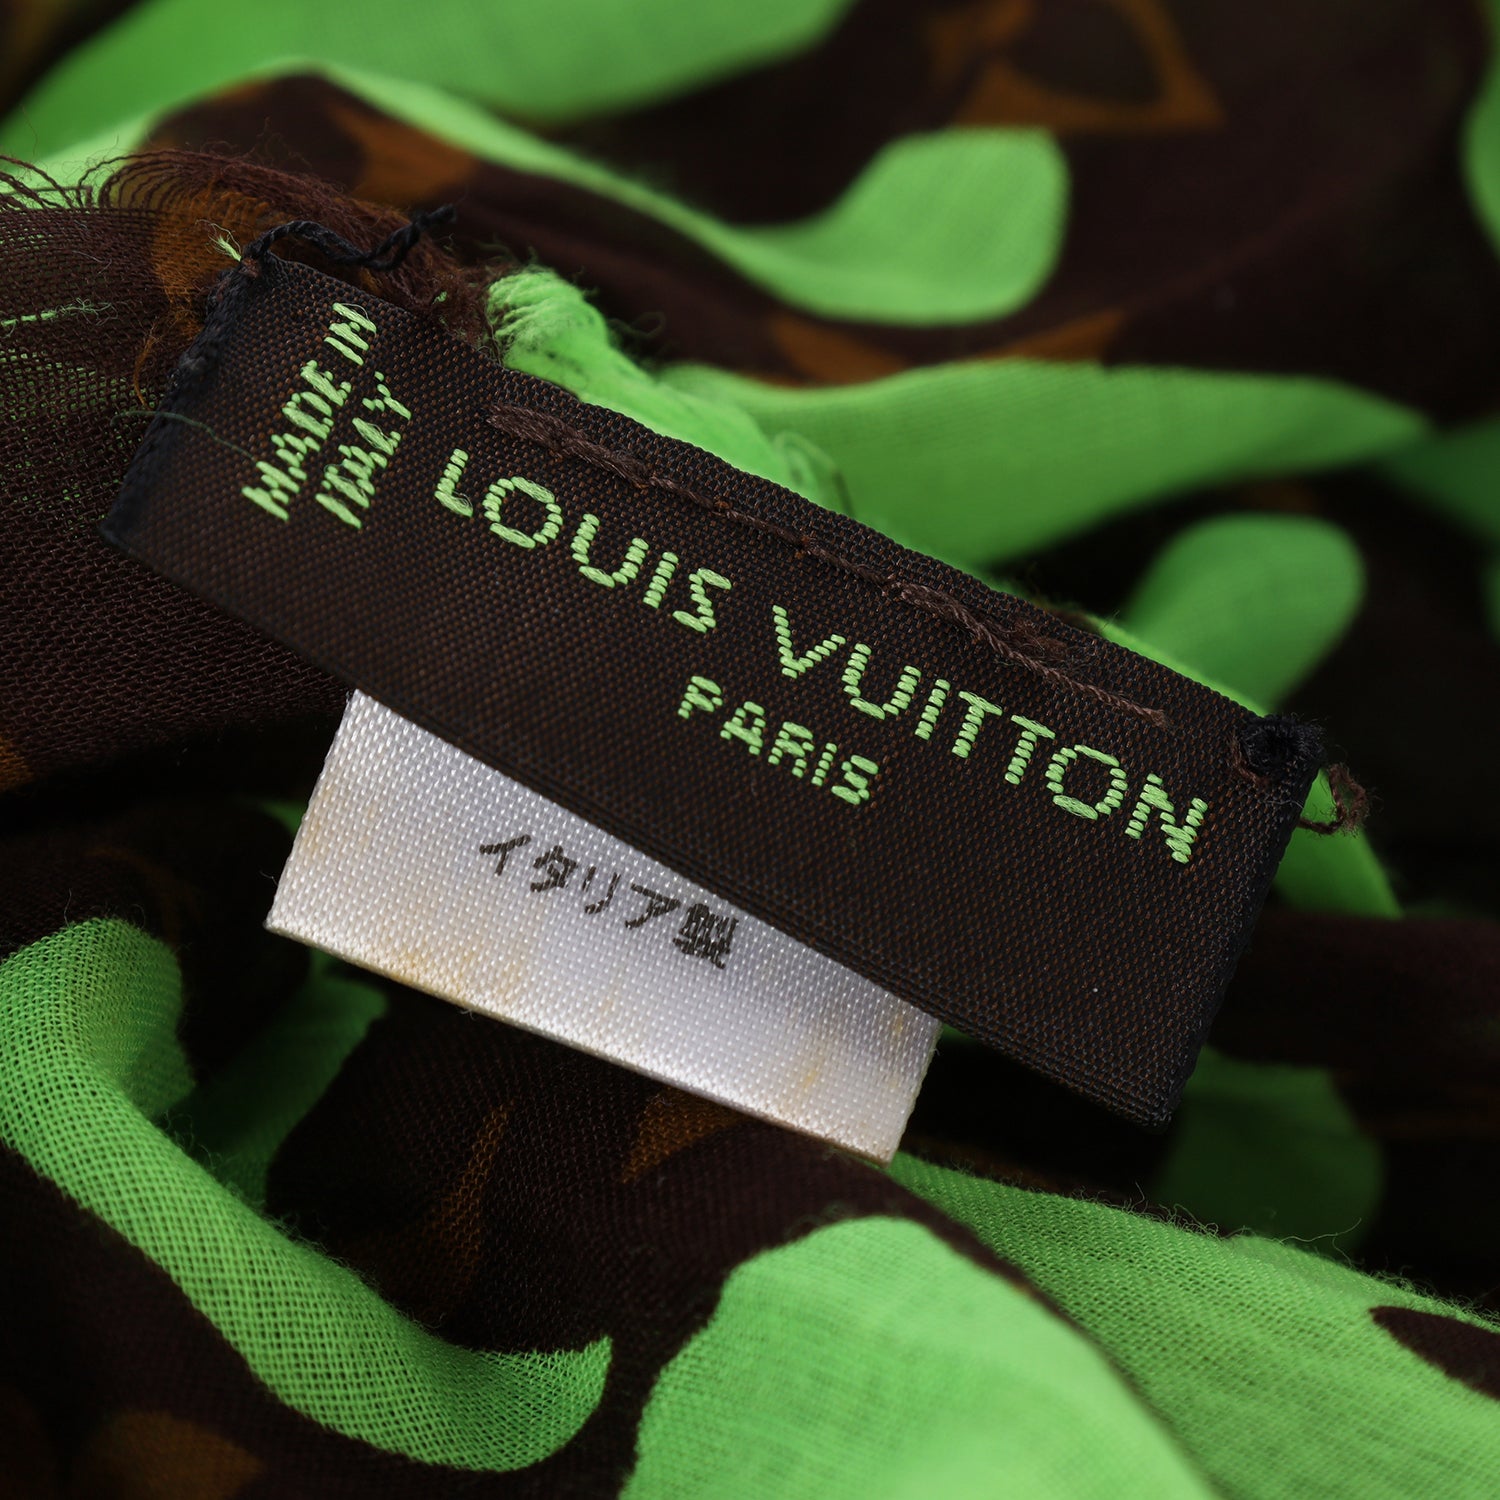 Louis Vuitton Stephen Sprouse 'Rock N' Roses' Scarf ○ Labellov ○ Buy and  Sell Authentic Luxury